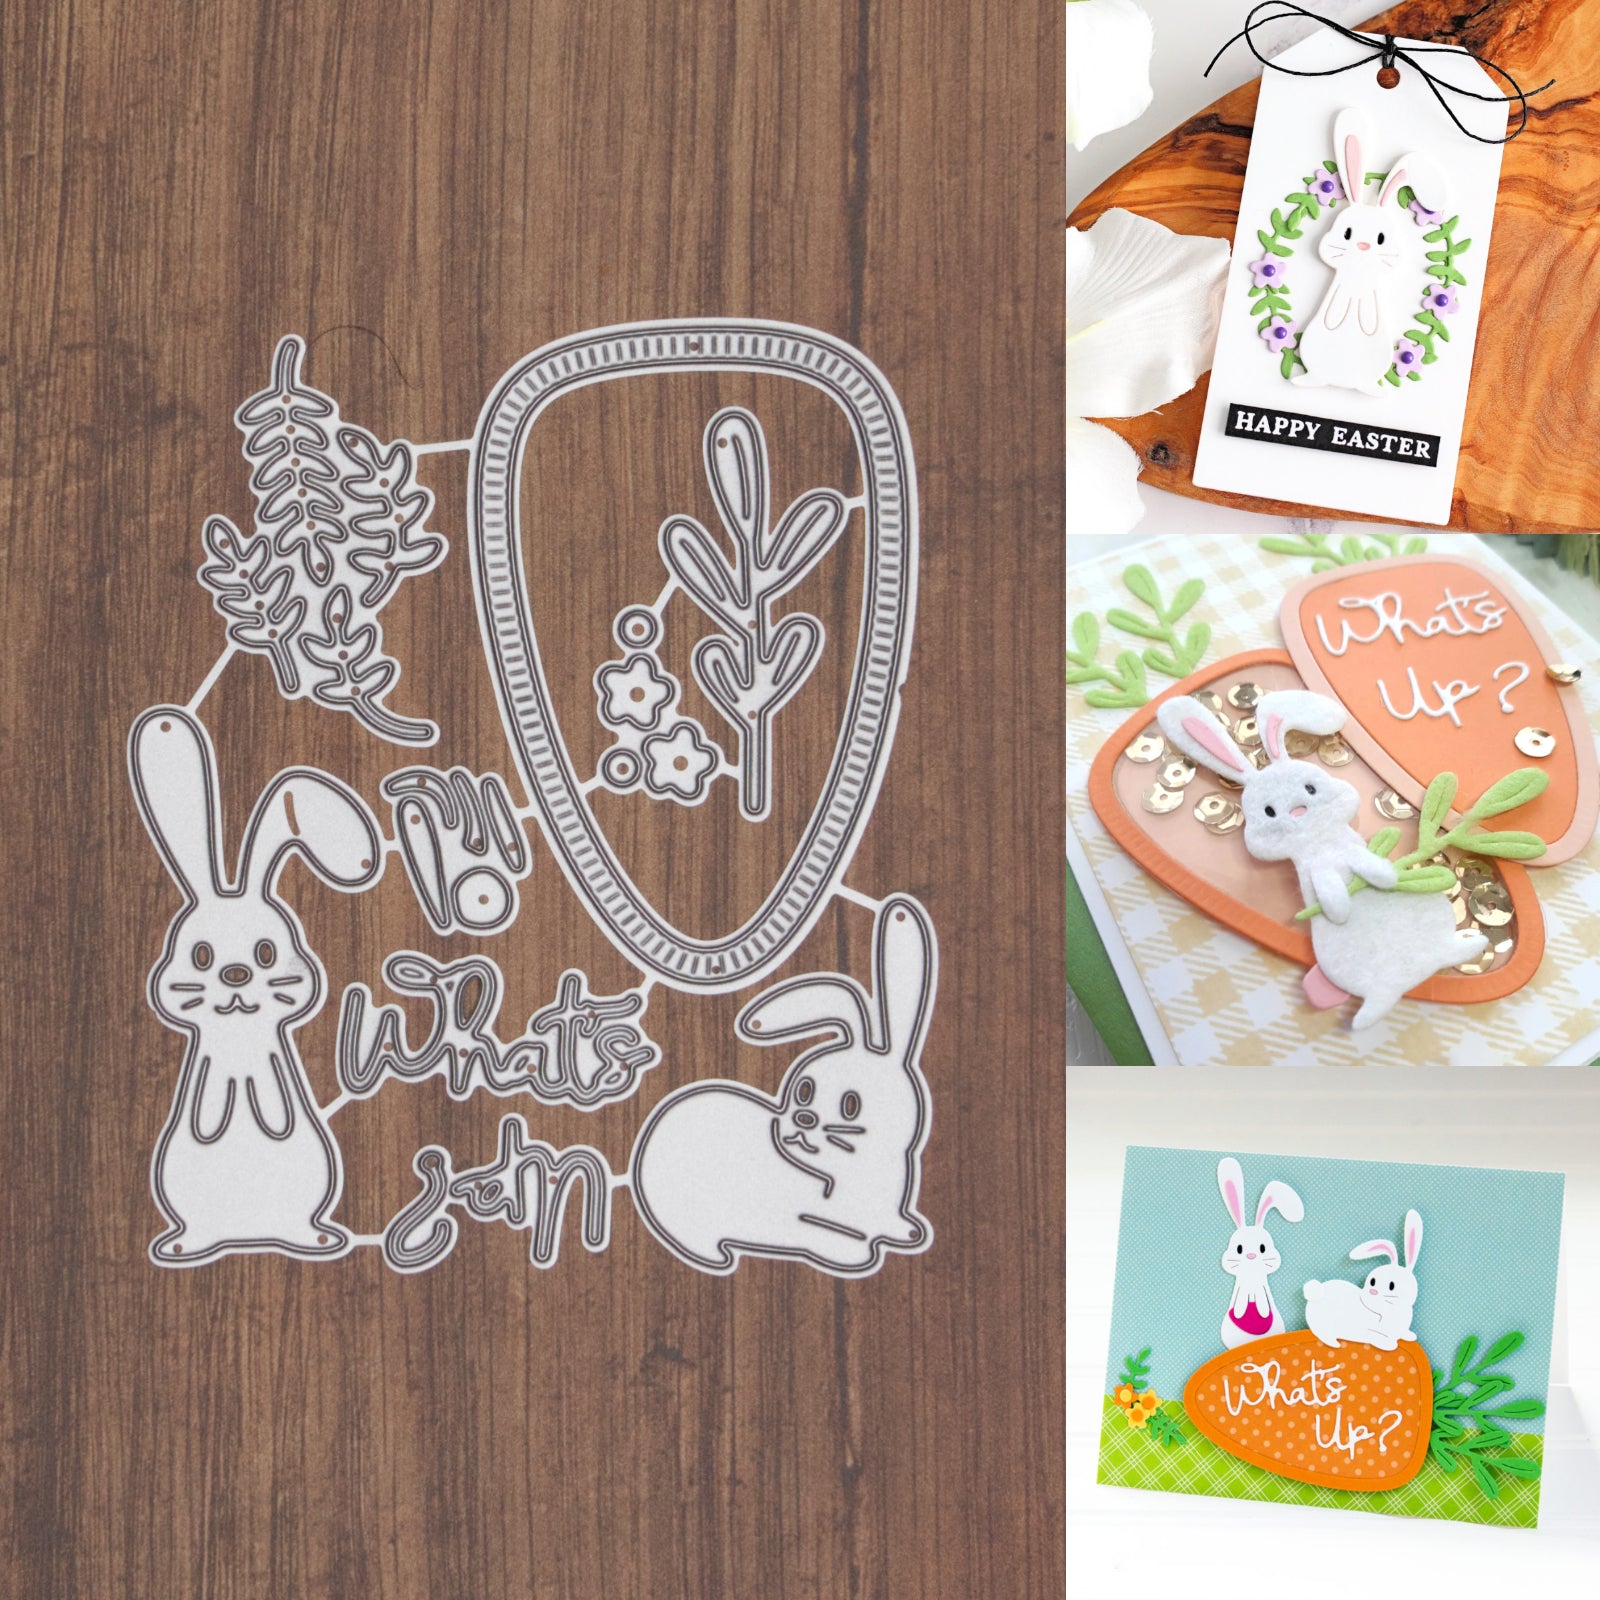 What’s Up? Bunny Duo w Carrot Frame Cutting Dies